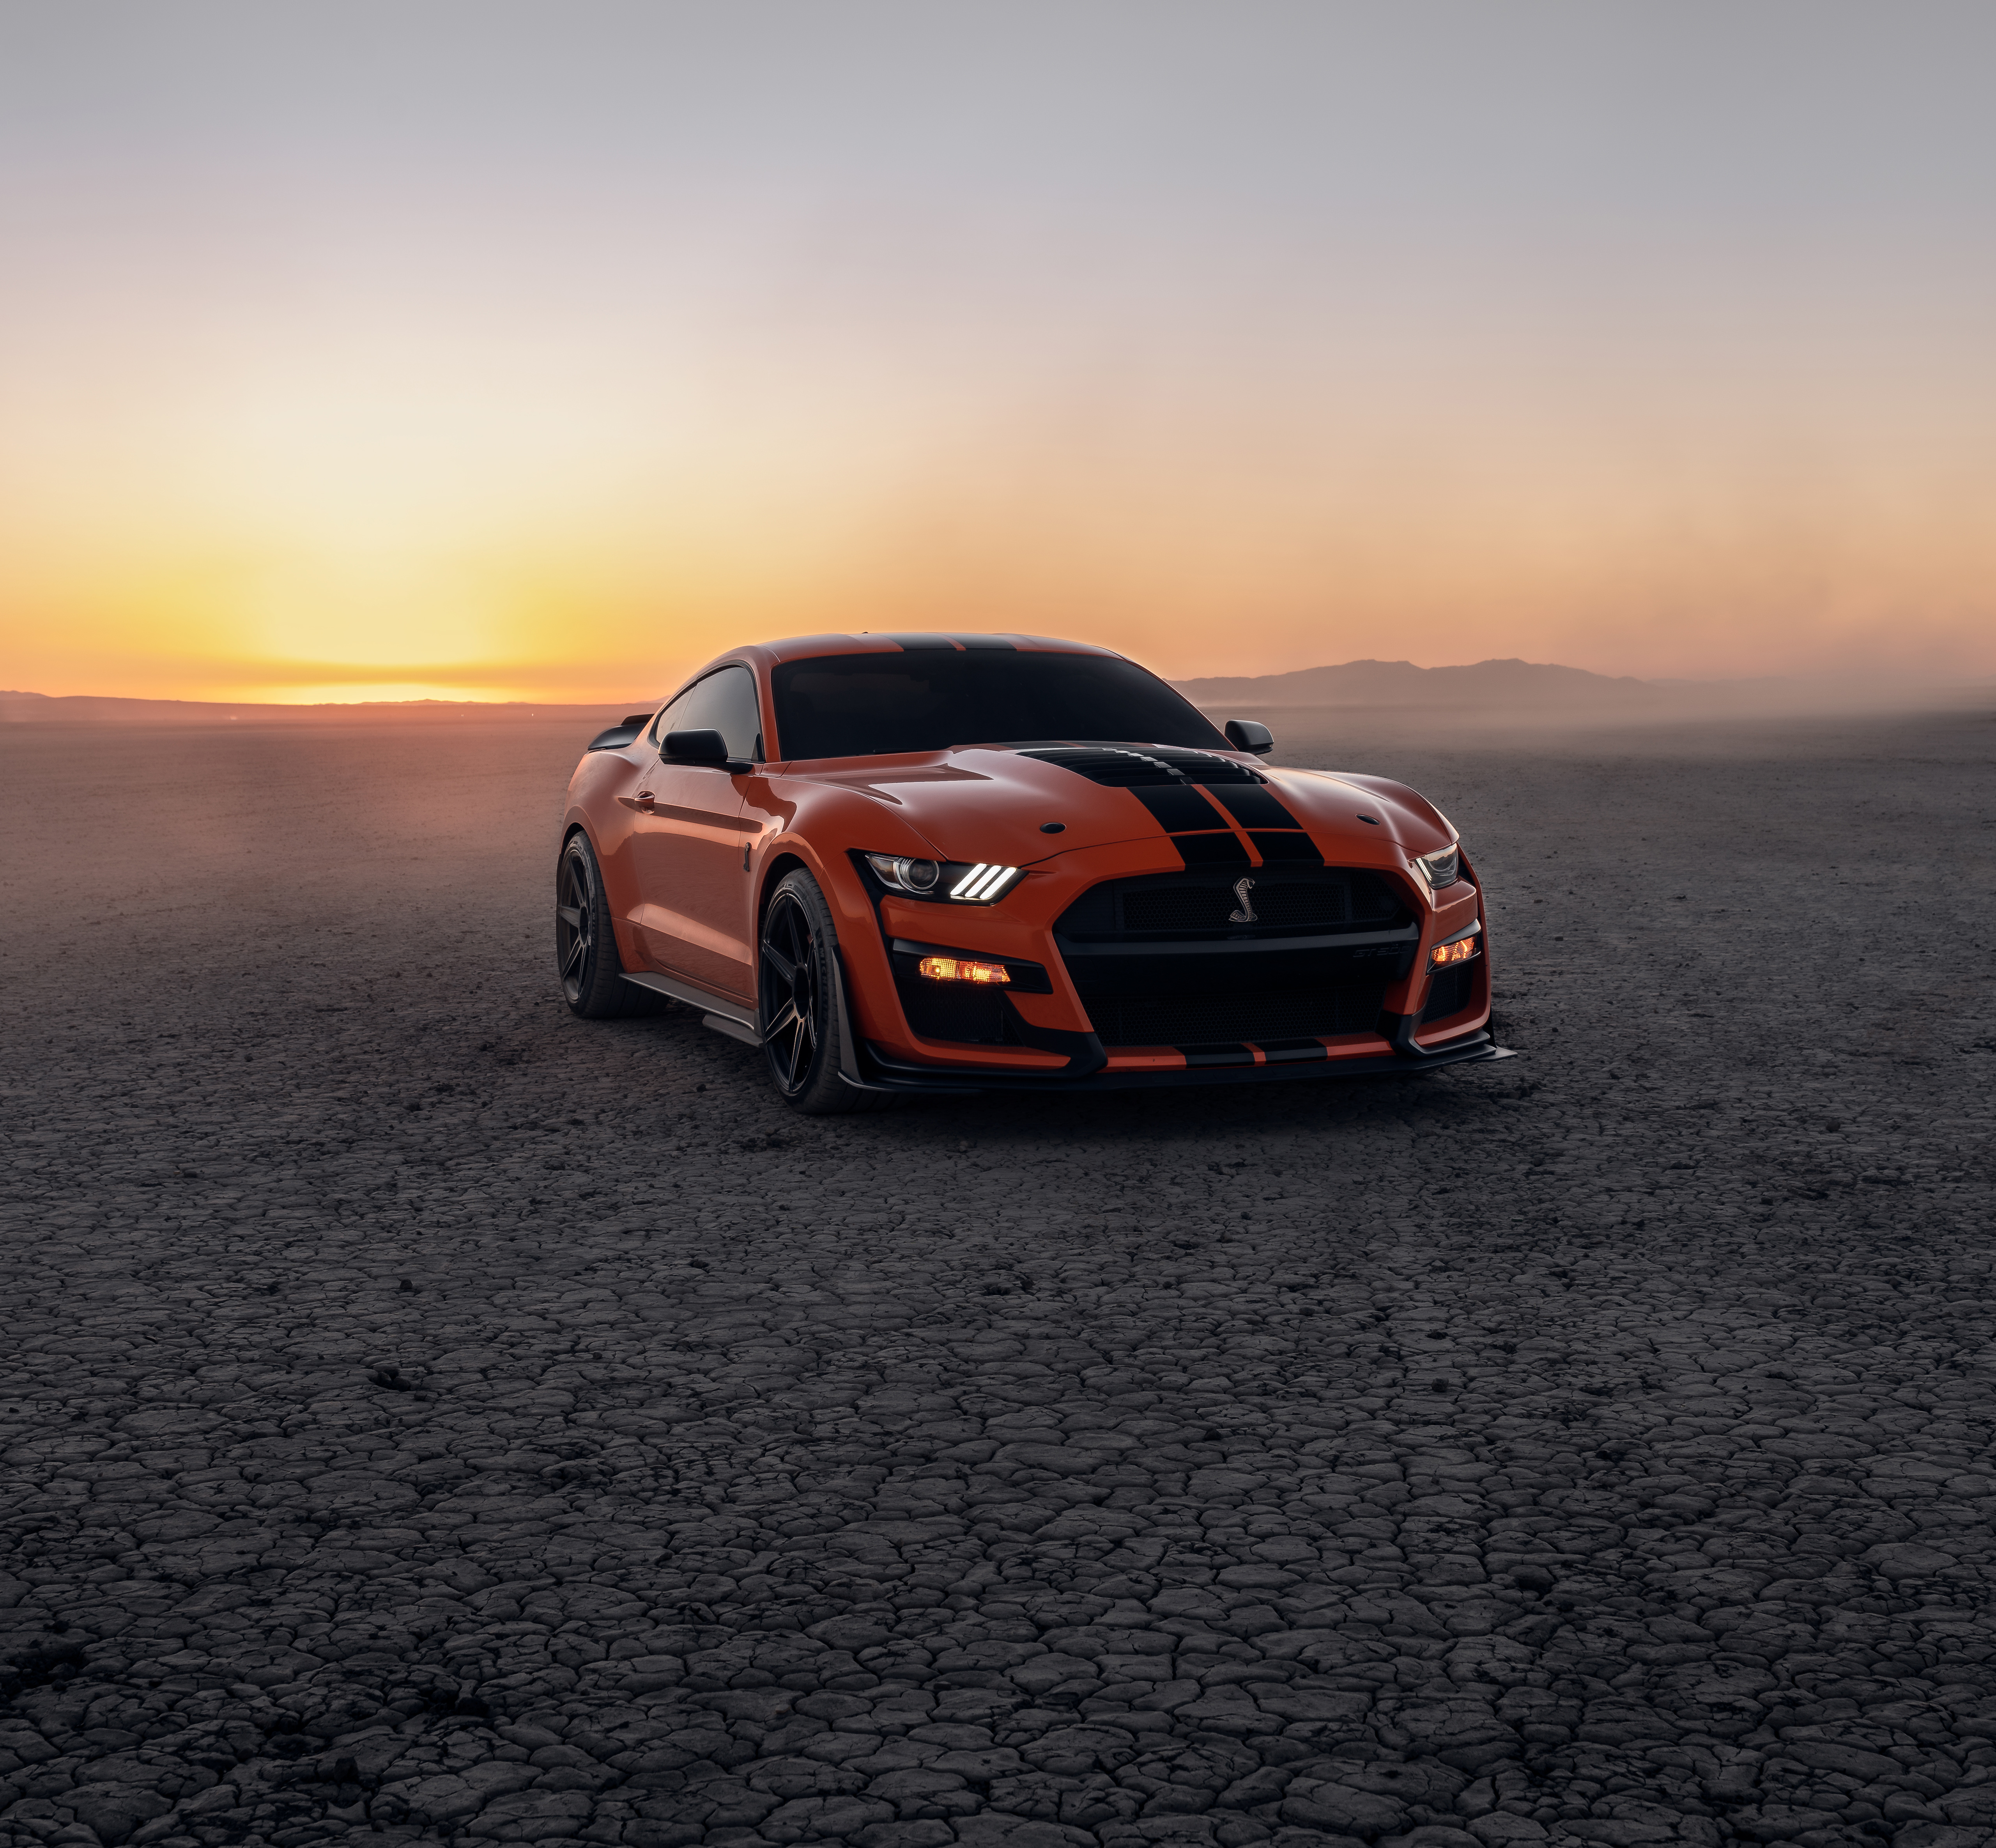 Ford Mustang Shelby GT500 Wallpaper 4K, Sports cars, 5K, Cars, #9769